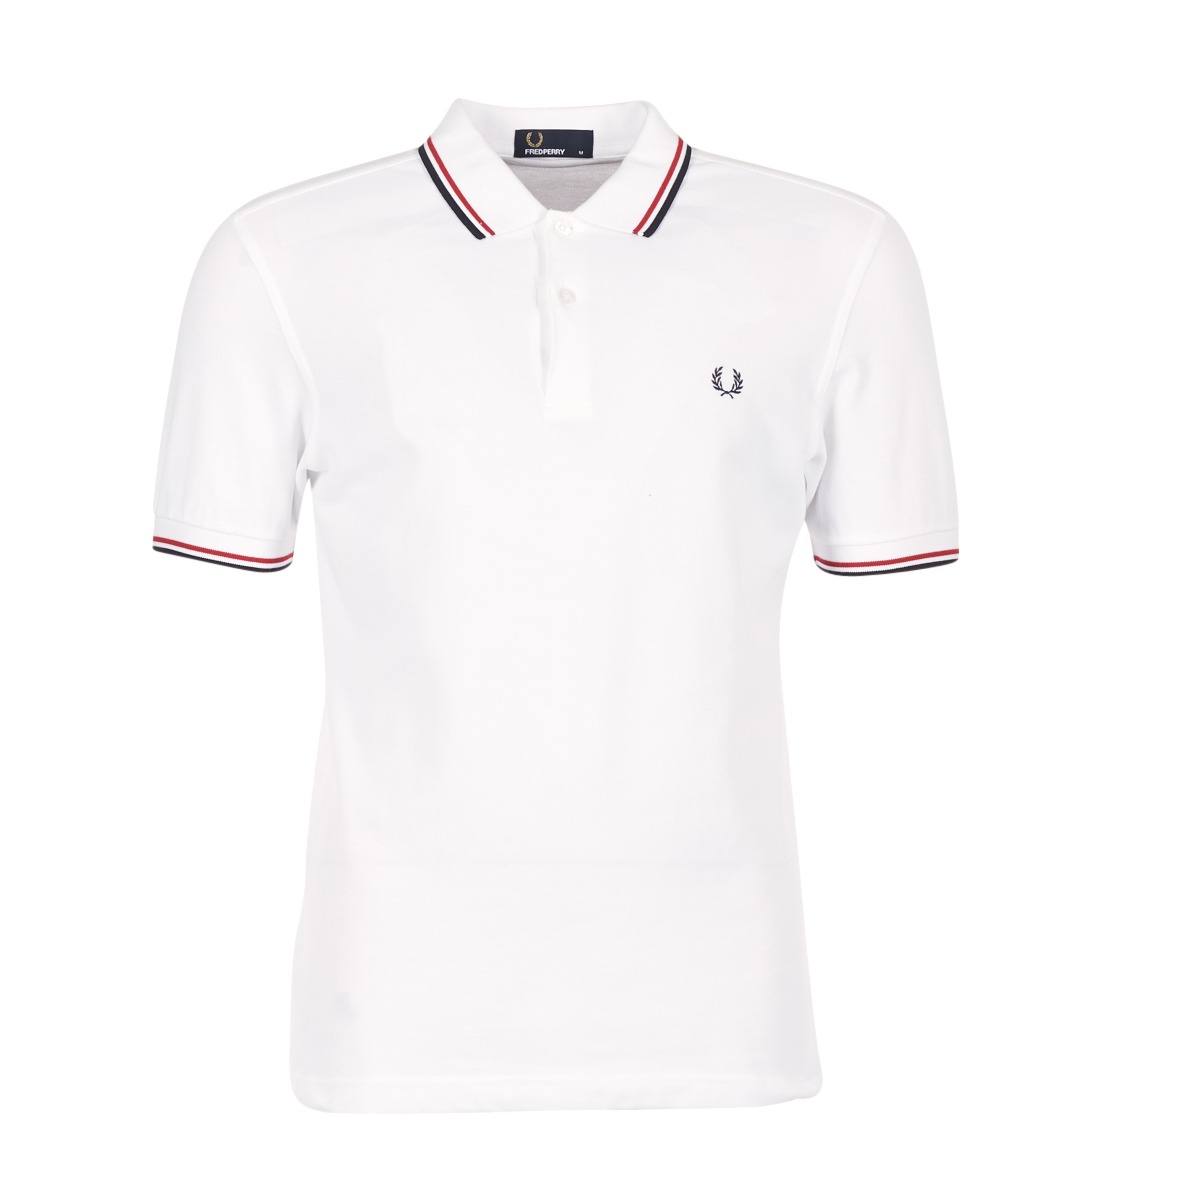 Fred Perry - Twin Tipped Shirt - Heren Polo - XS - Wit/Blauw/Rood